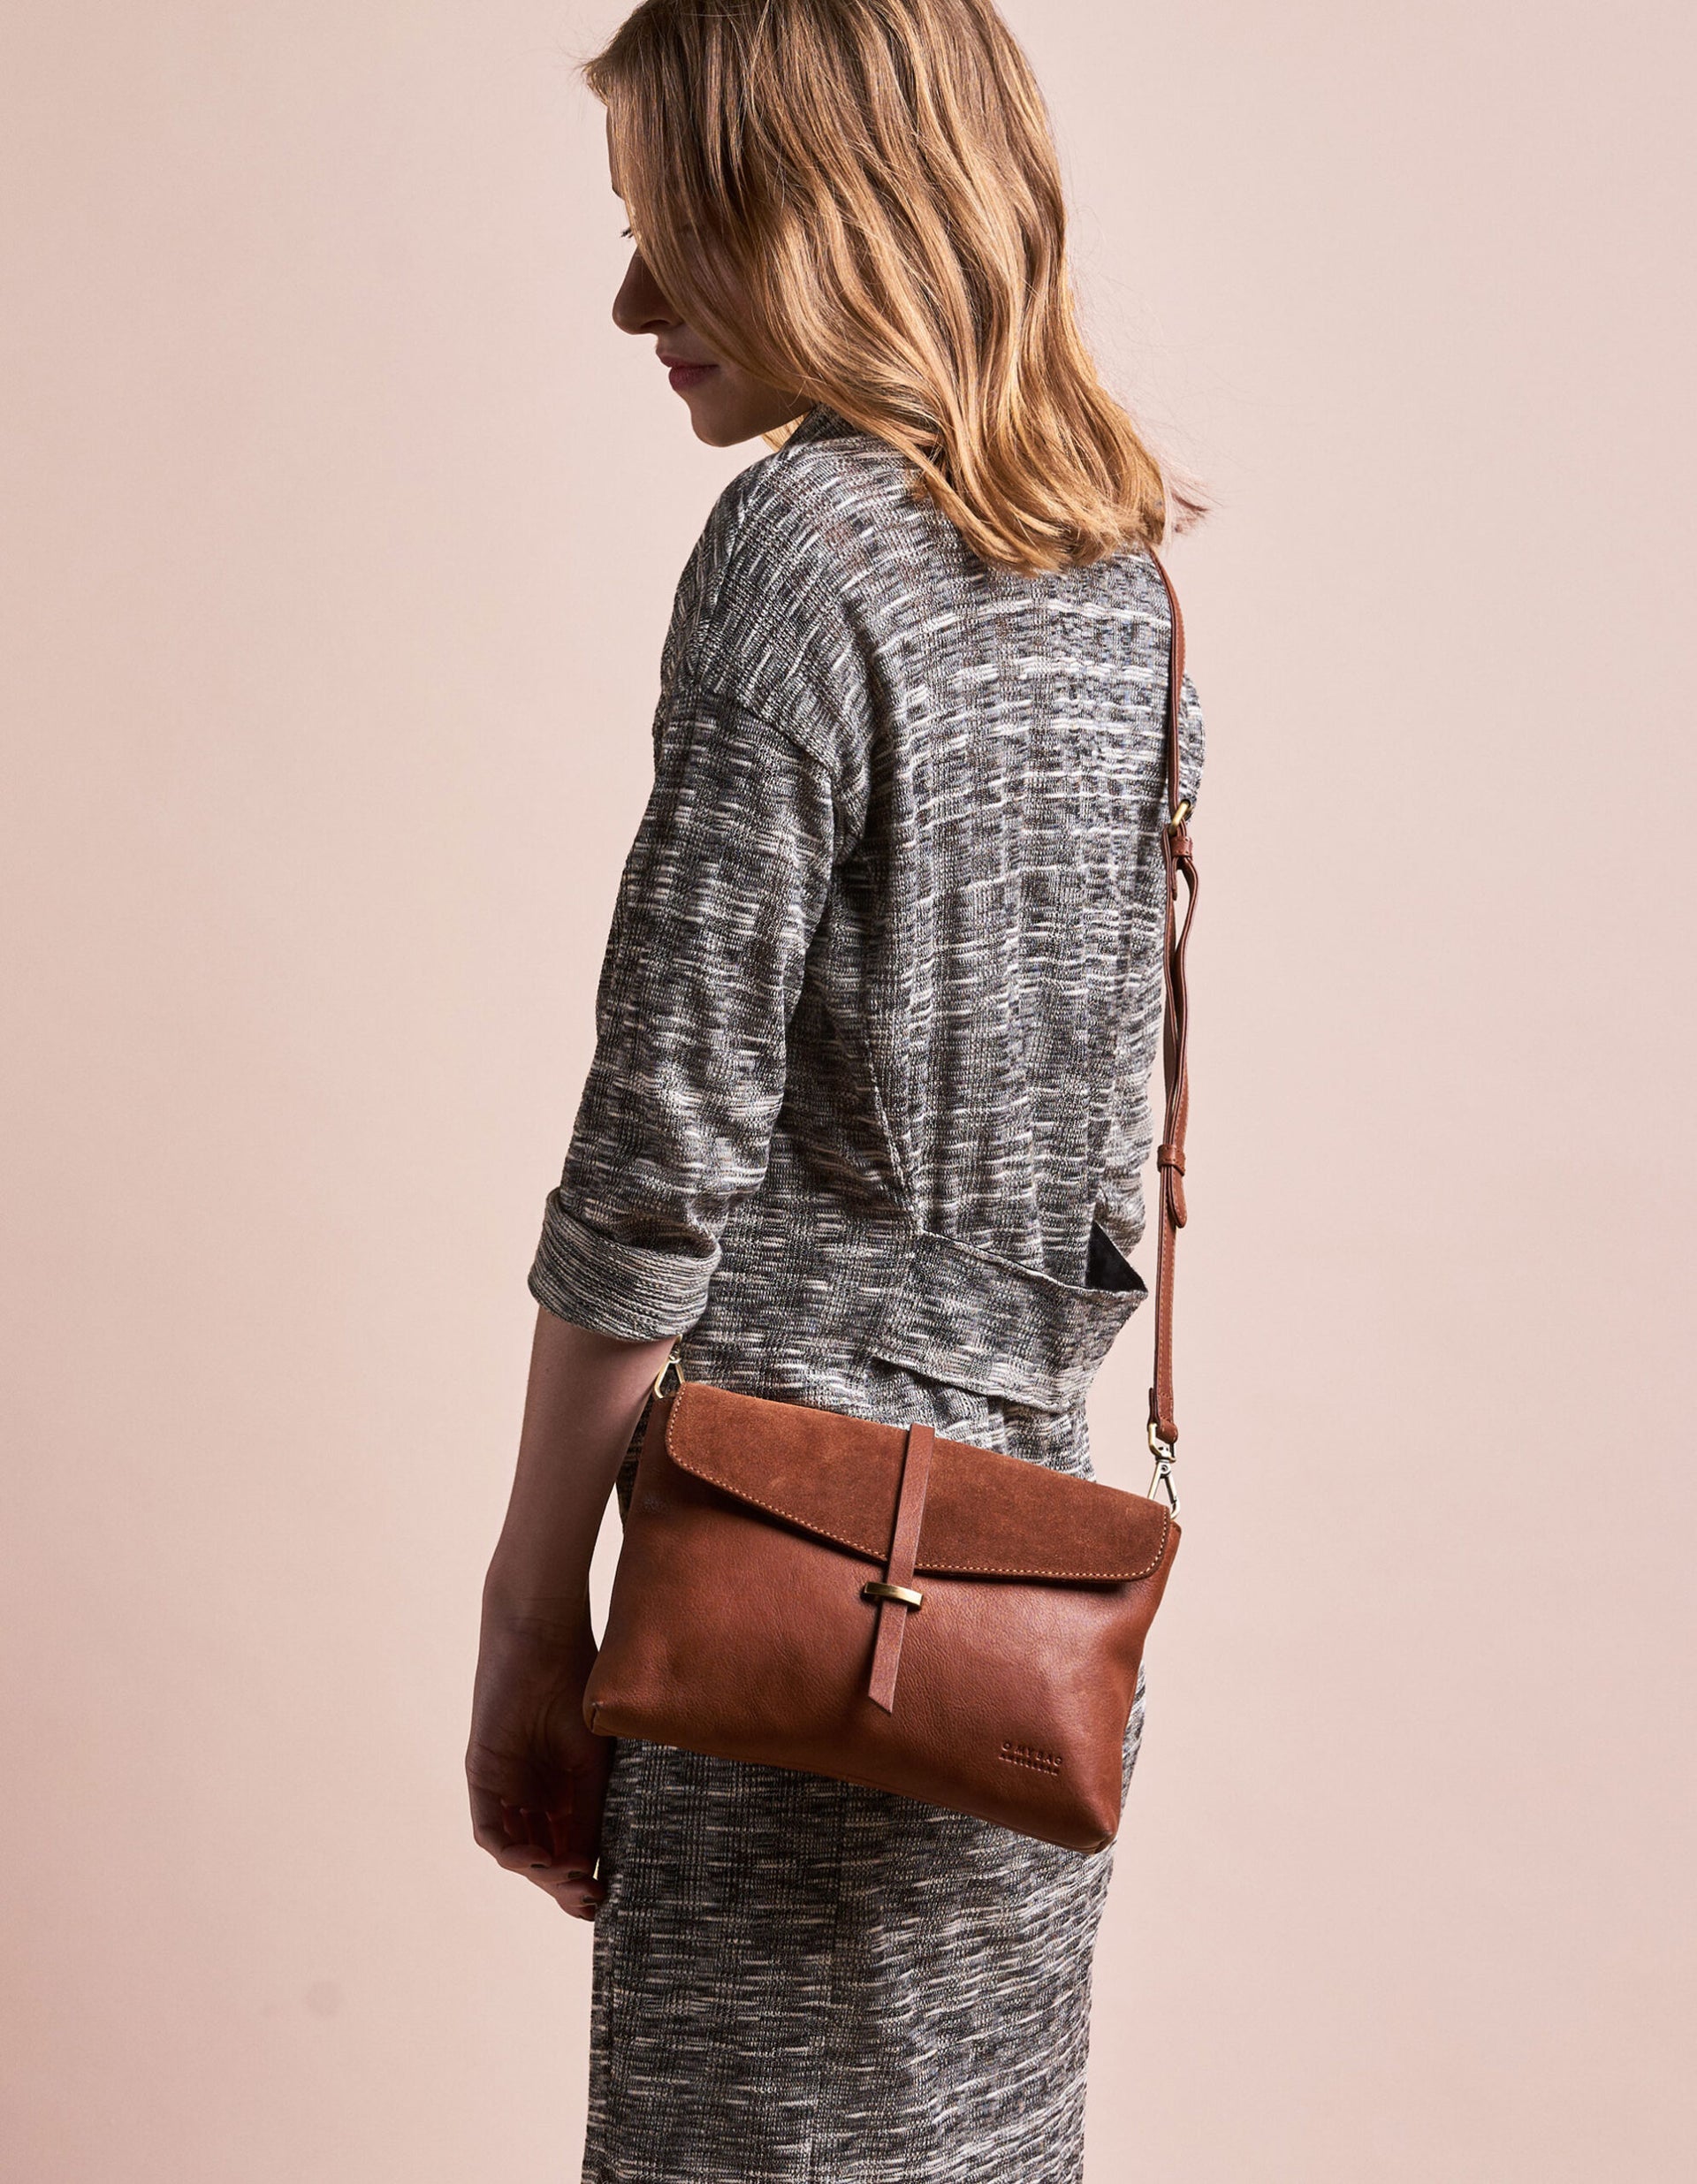 Wild Oak Soft Grain & Suede leather womens handbag. Square shape with an adjustable strap. Model product image